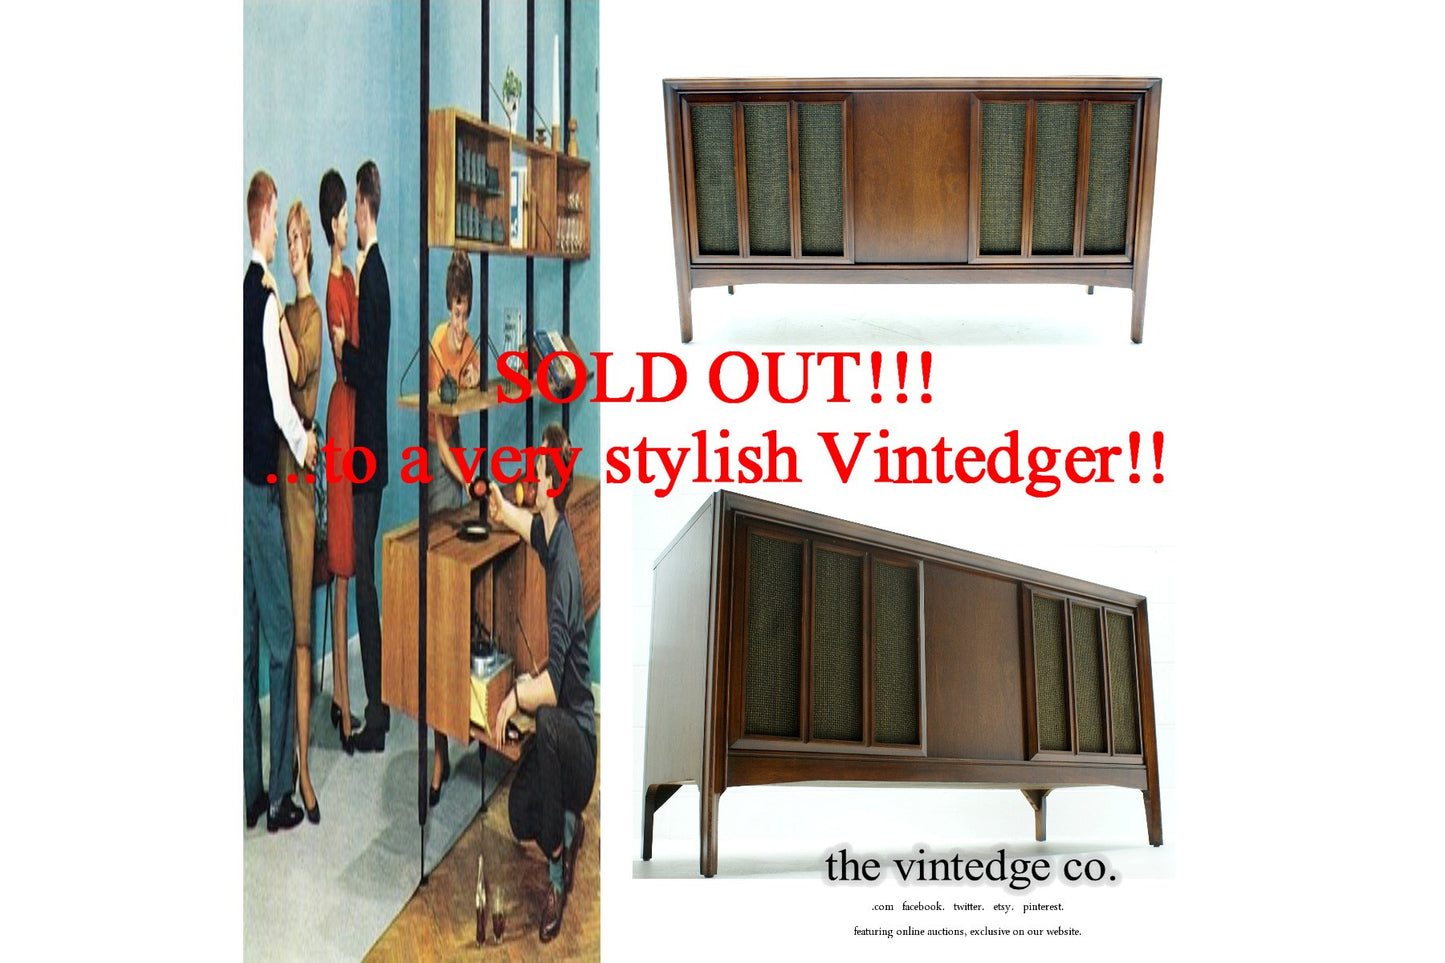 SOLD - MCM Stereo Console The Vintedge Co.